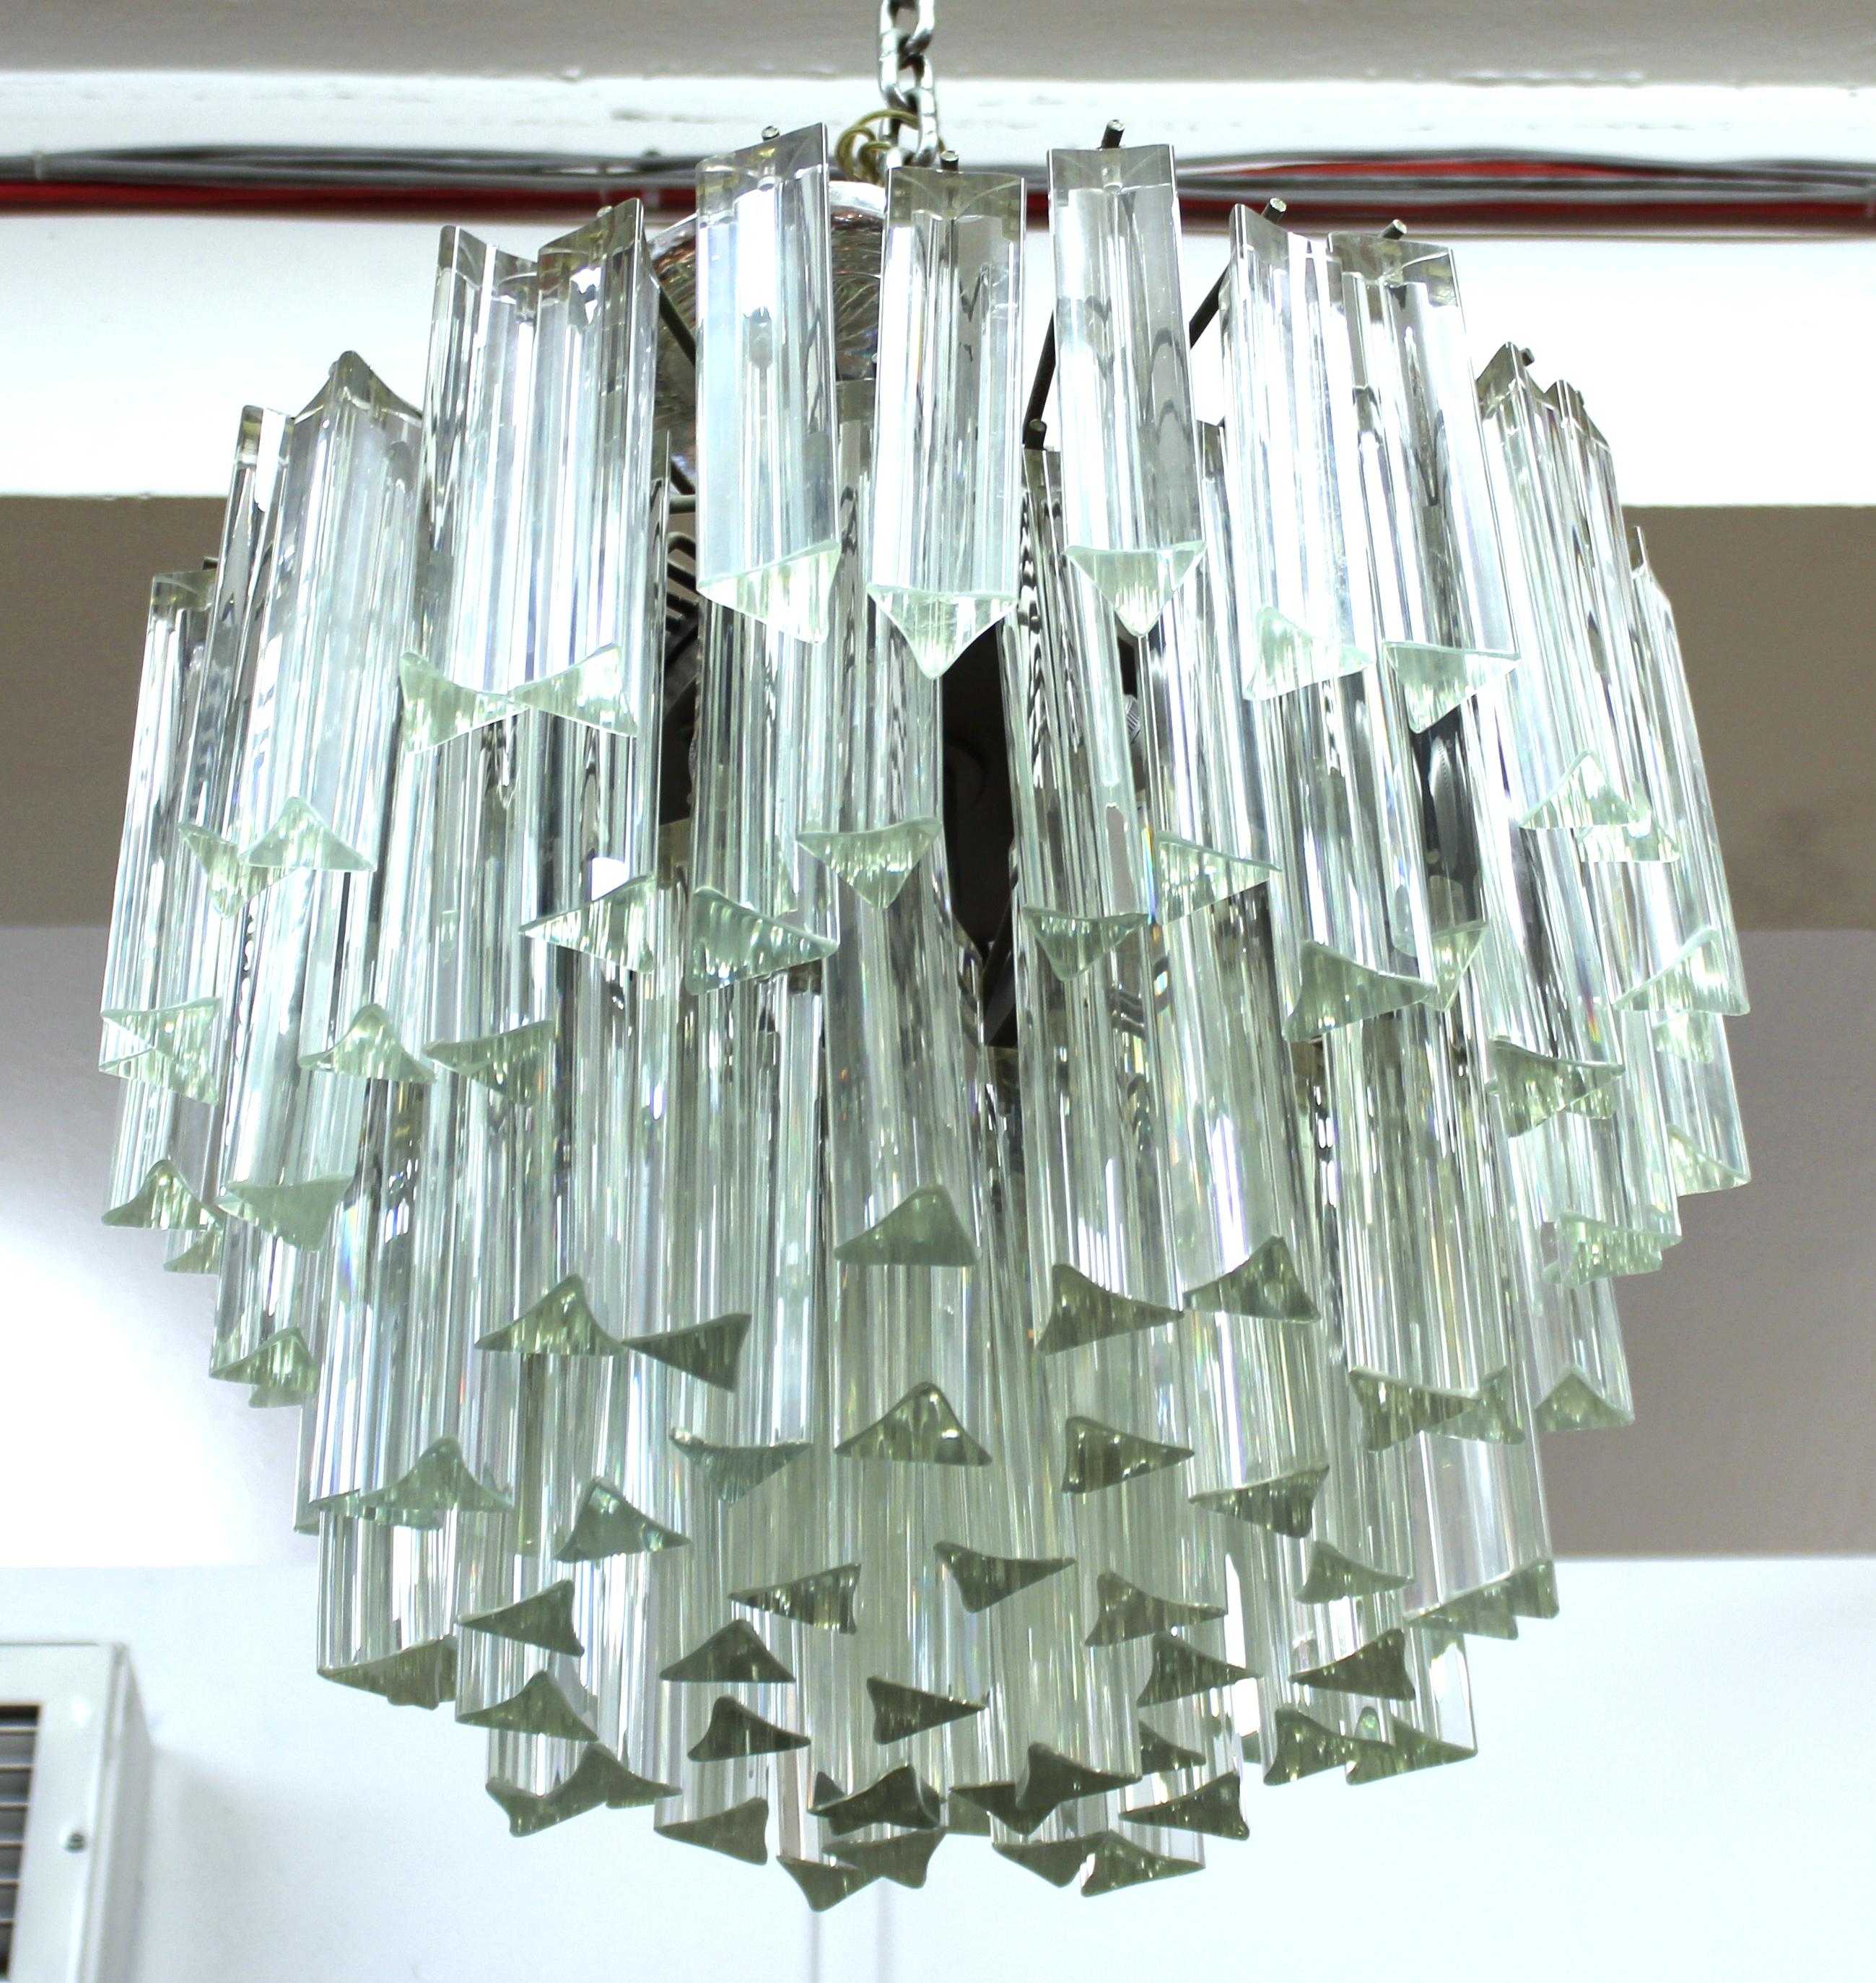 Venini Italian Mid-Century Modern trideri glass prism chandelier. In great vintage condition with age-appropriate wear.